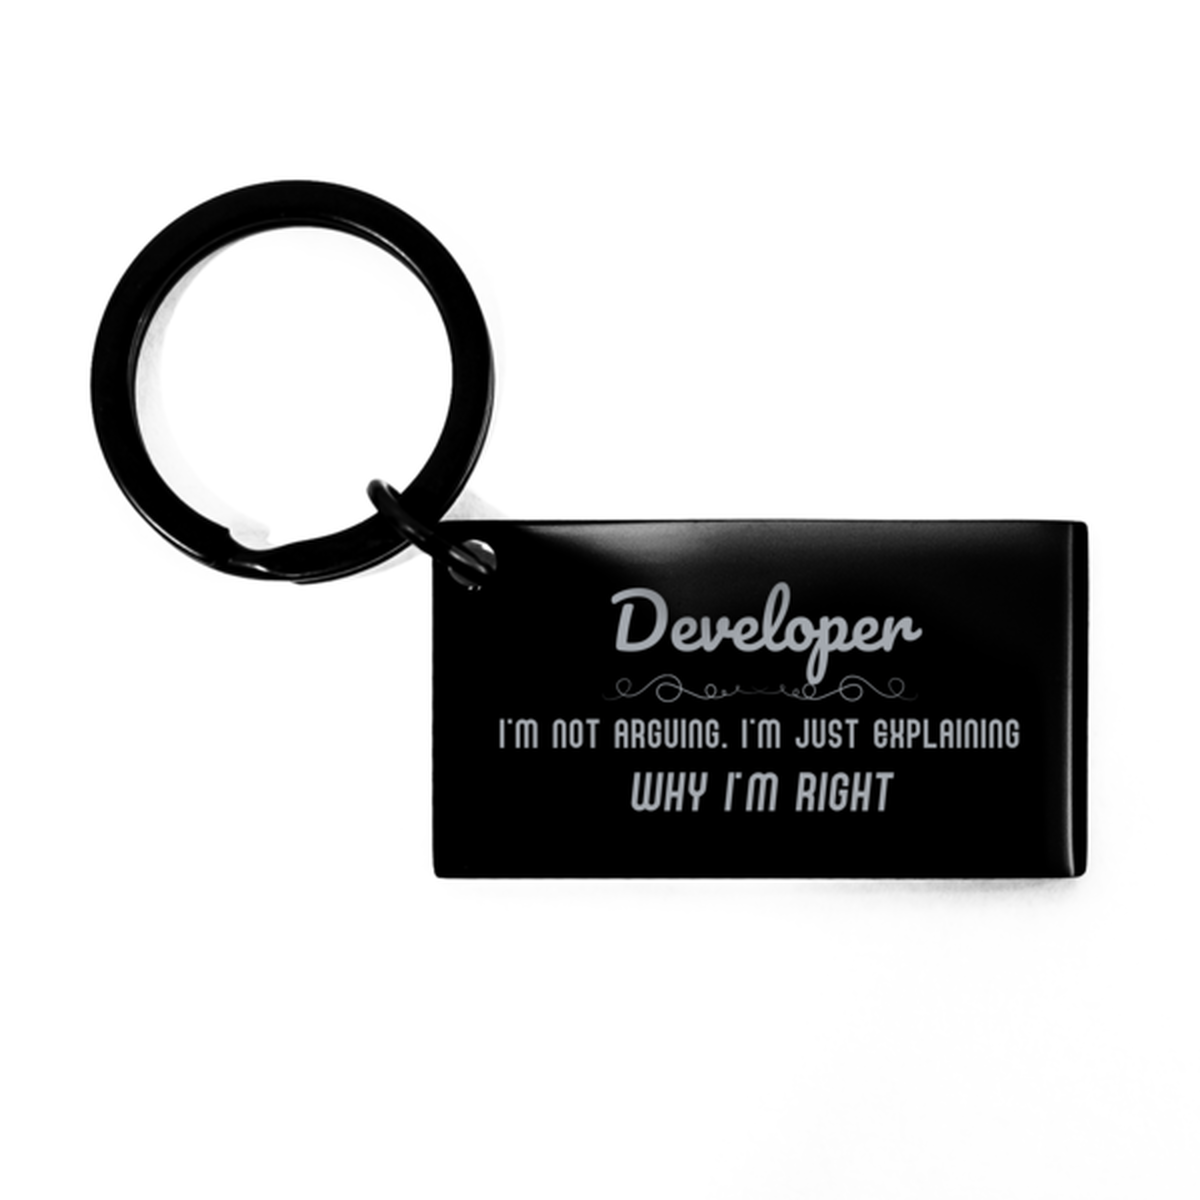 Developer I'm not Arguing. I'm Just Explaining Why I'm RIGHT Keychain, Funny Saying Quote Developer Gifts For Developer Graduation Birthday Christmas Gifts for Men Women Coworker